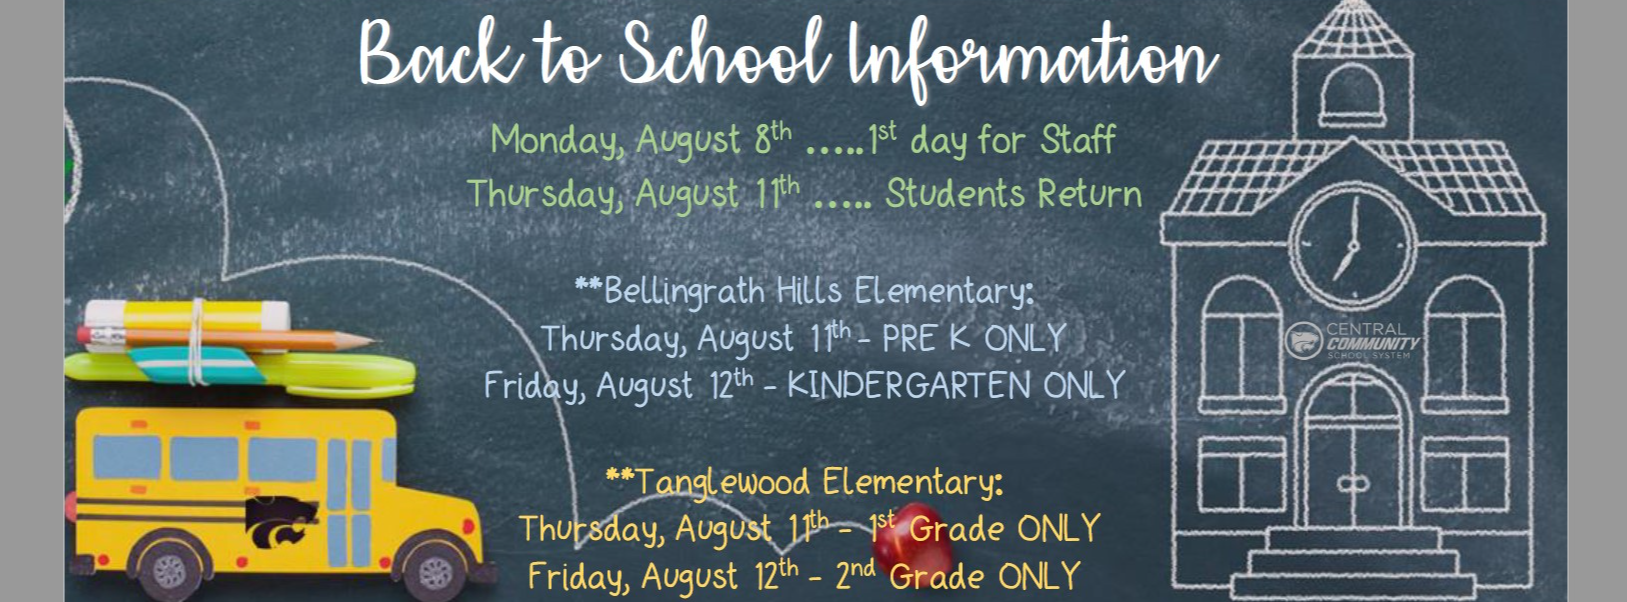 Back to School Information!  Monday, August 8th - 1st day for Staff  Thursday, August 11th - Students Return  ** Bellingrath Hills Elementary:  Thursday, August 11th -  Pre K ONLY Friday, August 12th - Kindergarten ONLY **Tanglewood Elementary:  Thursday, August 11th -  1st Grade ONLY  Friday, August 12th -  2nd Grade ONLY